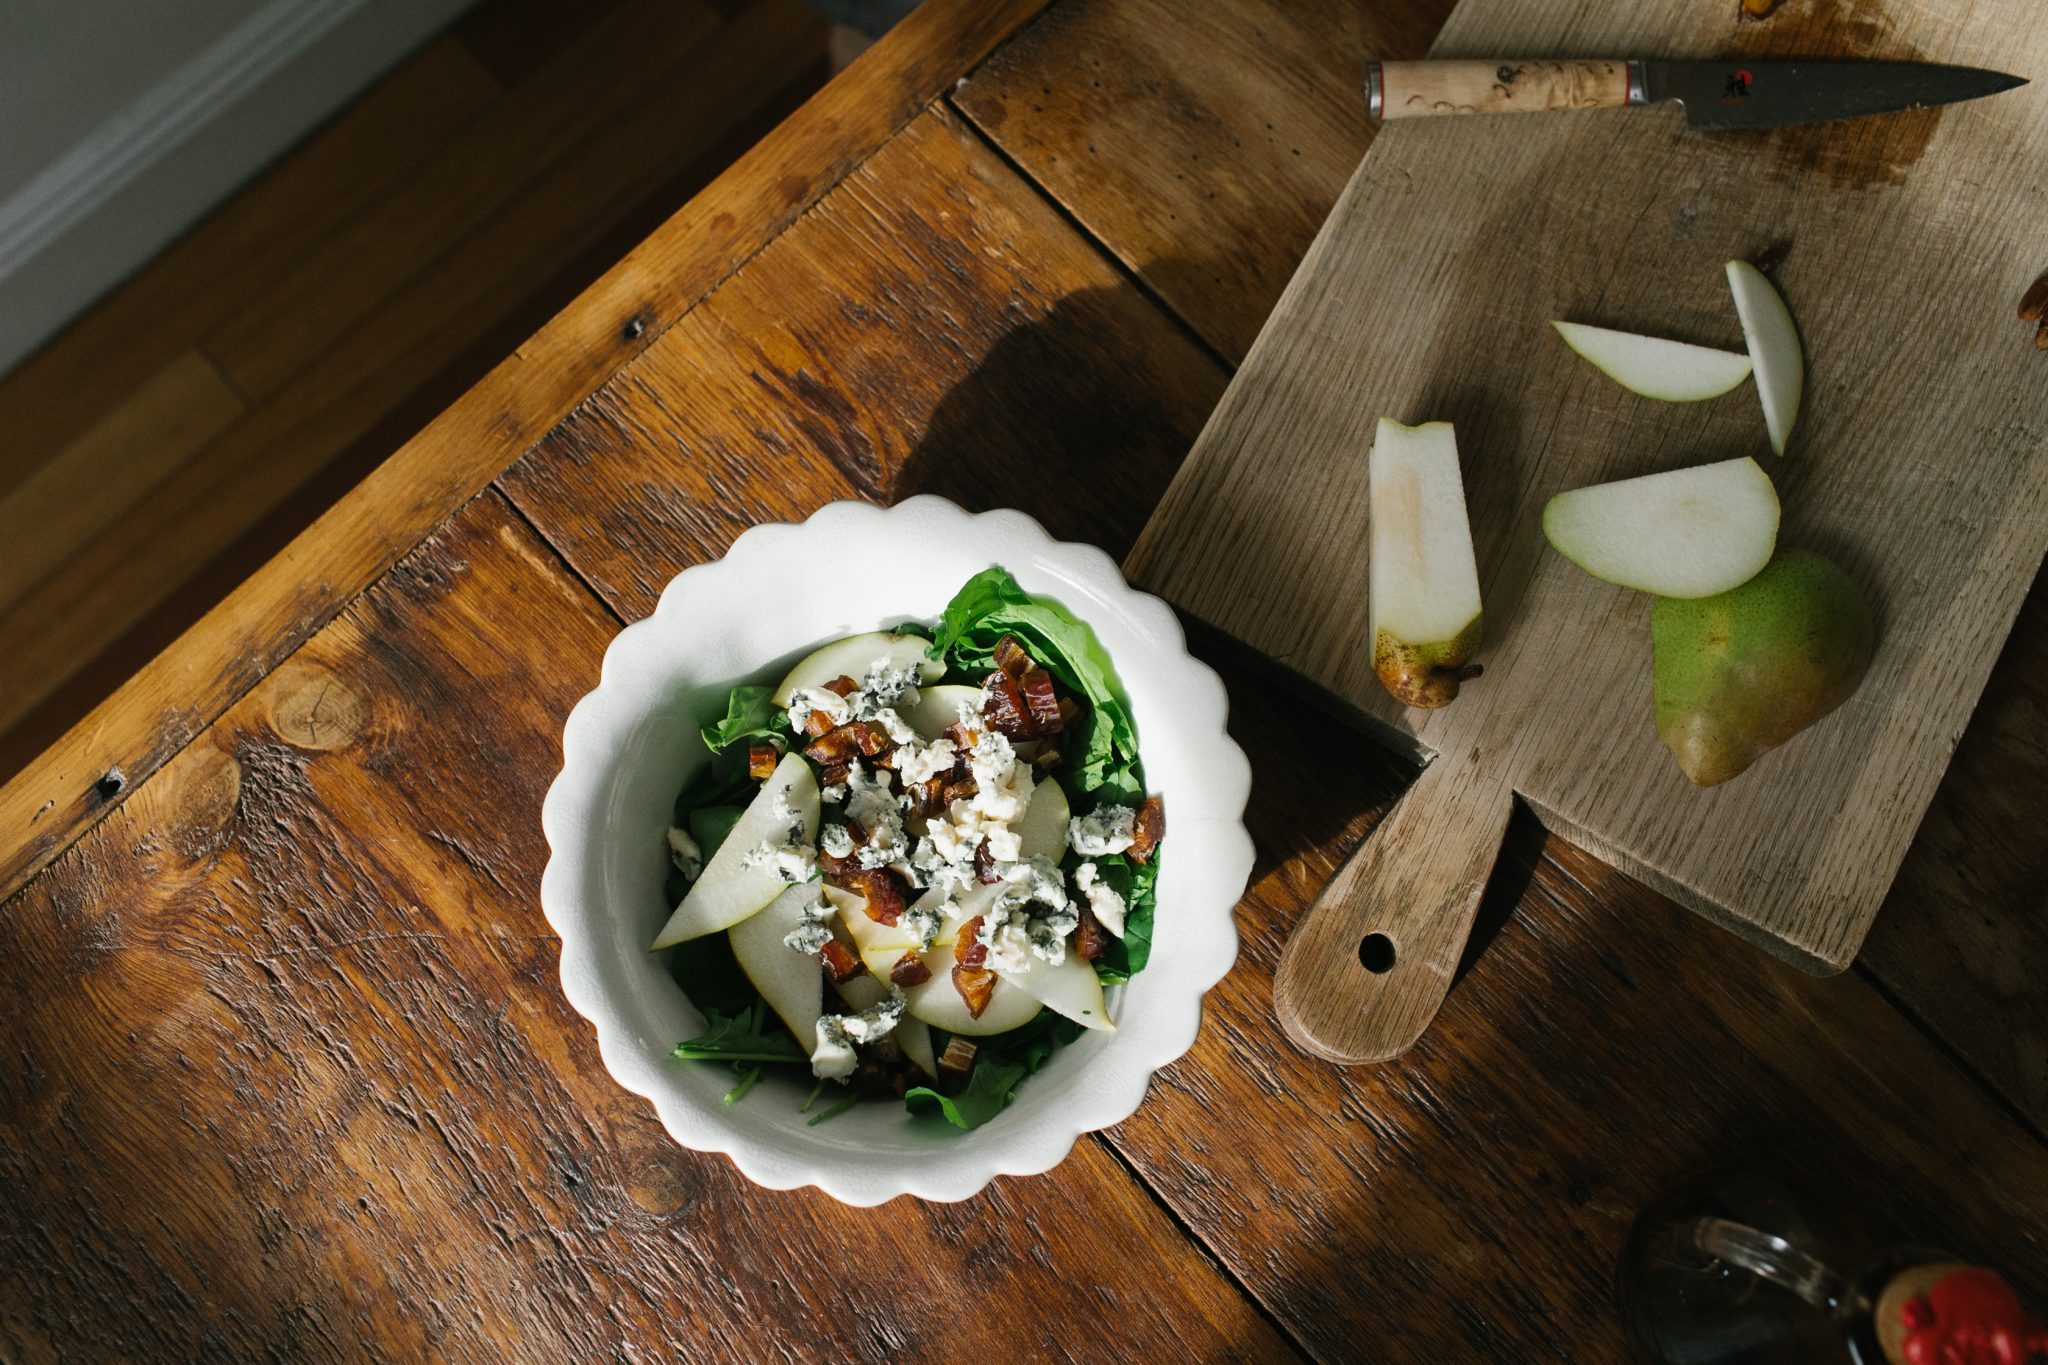 Aurugula Salad with Walnuts, Dates, Pears, and Blue Cheese